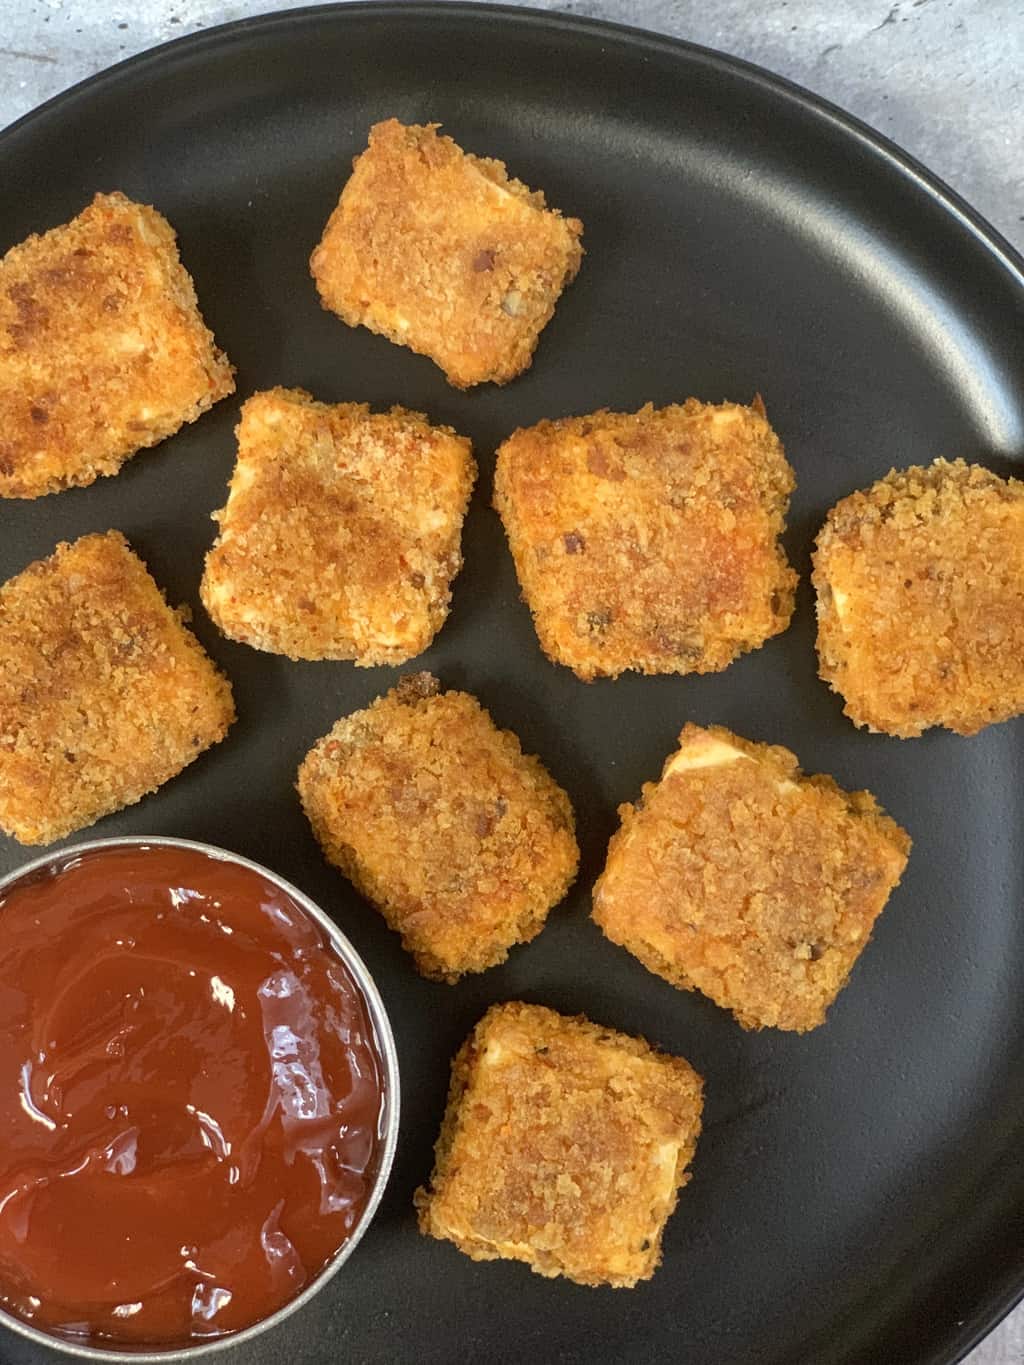 crispy paneer served on a plate with ketchup on the side